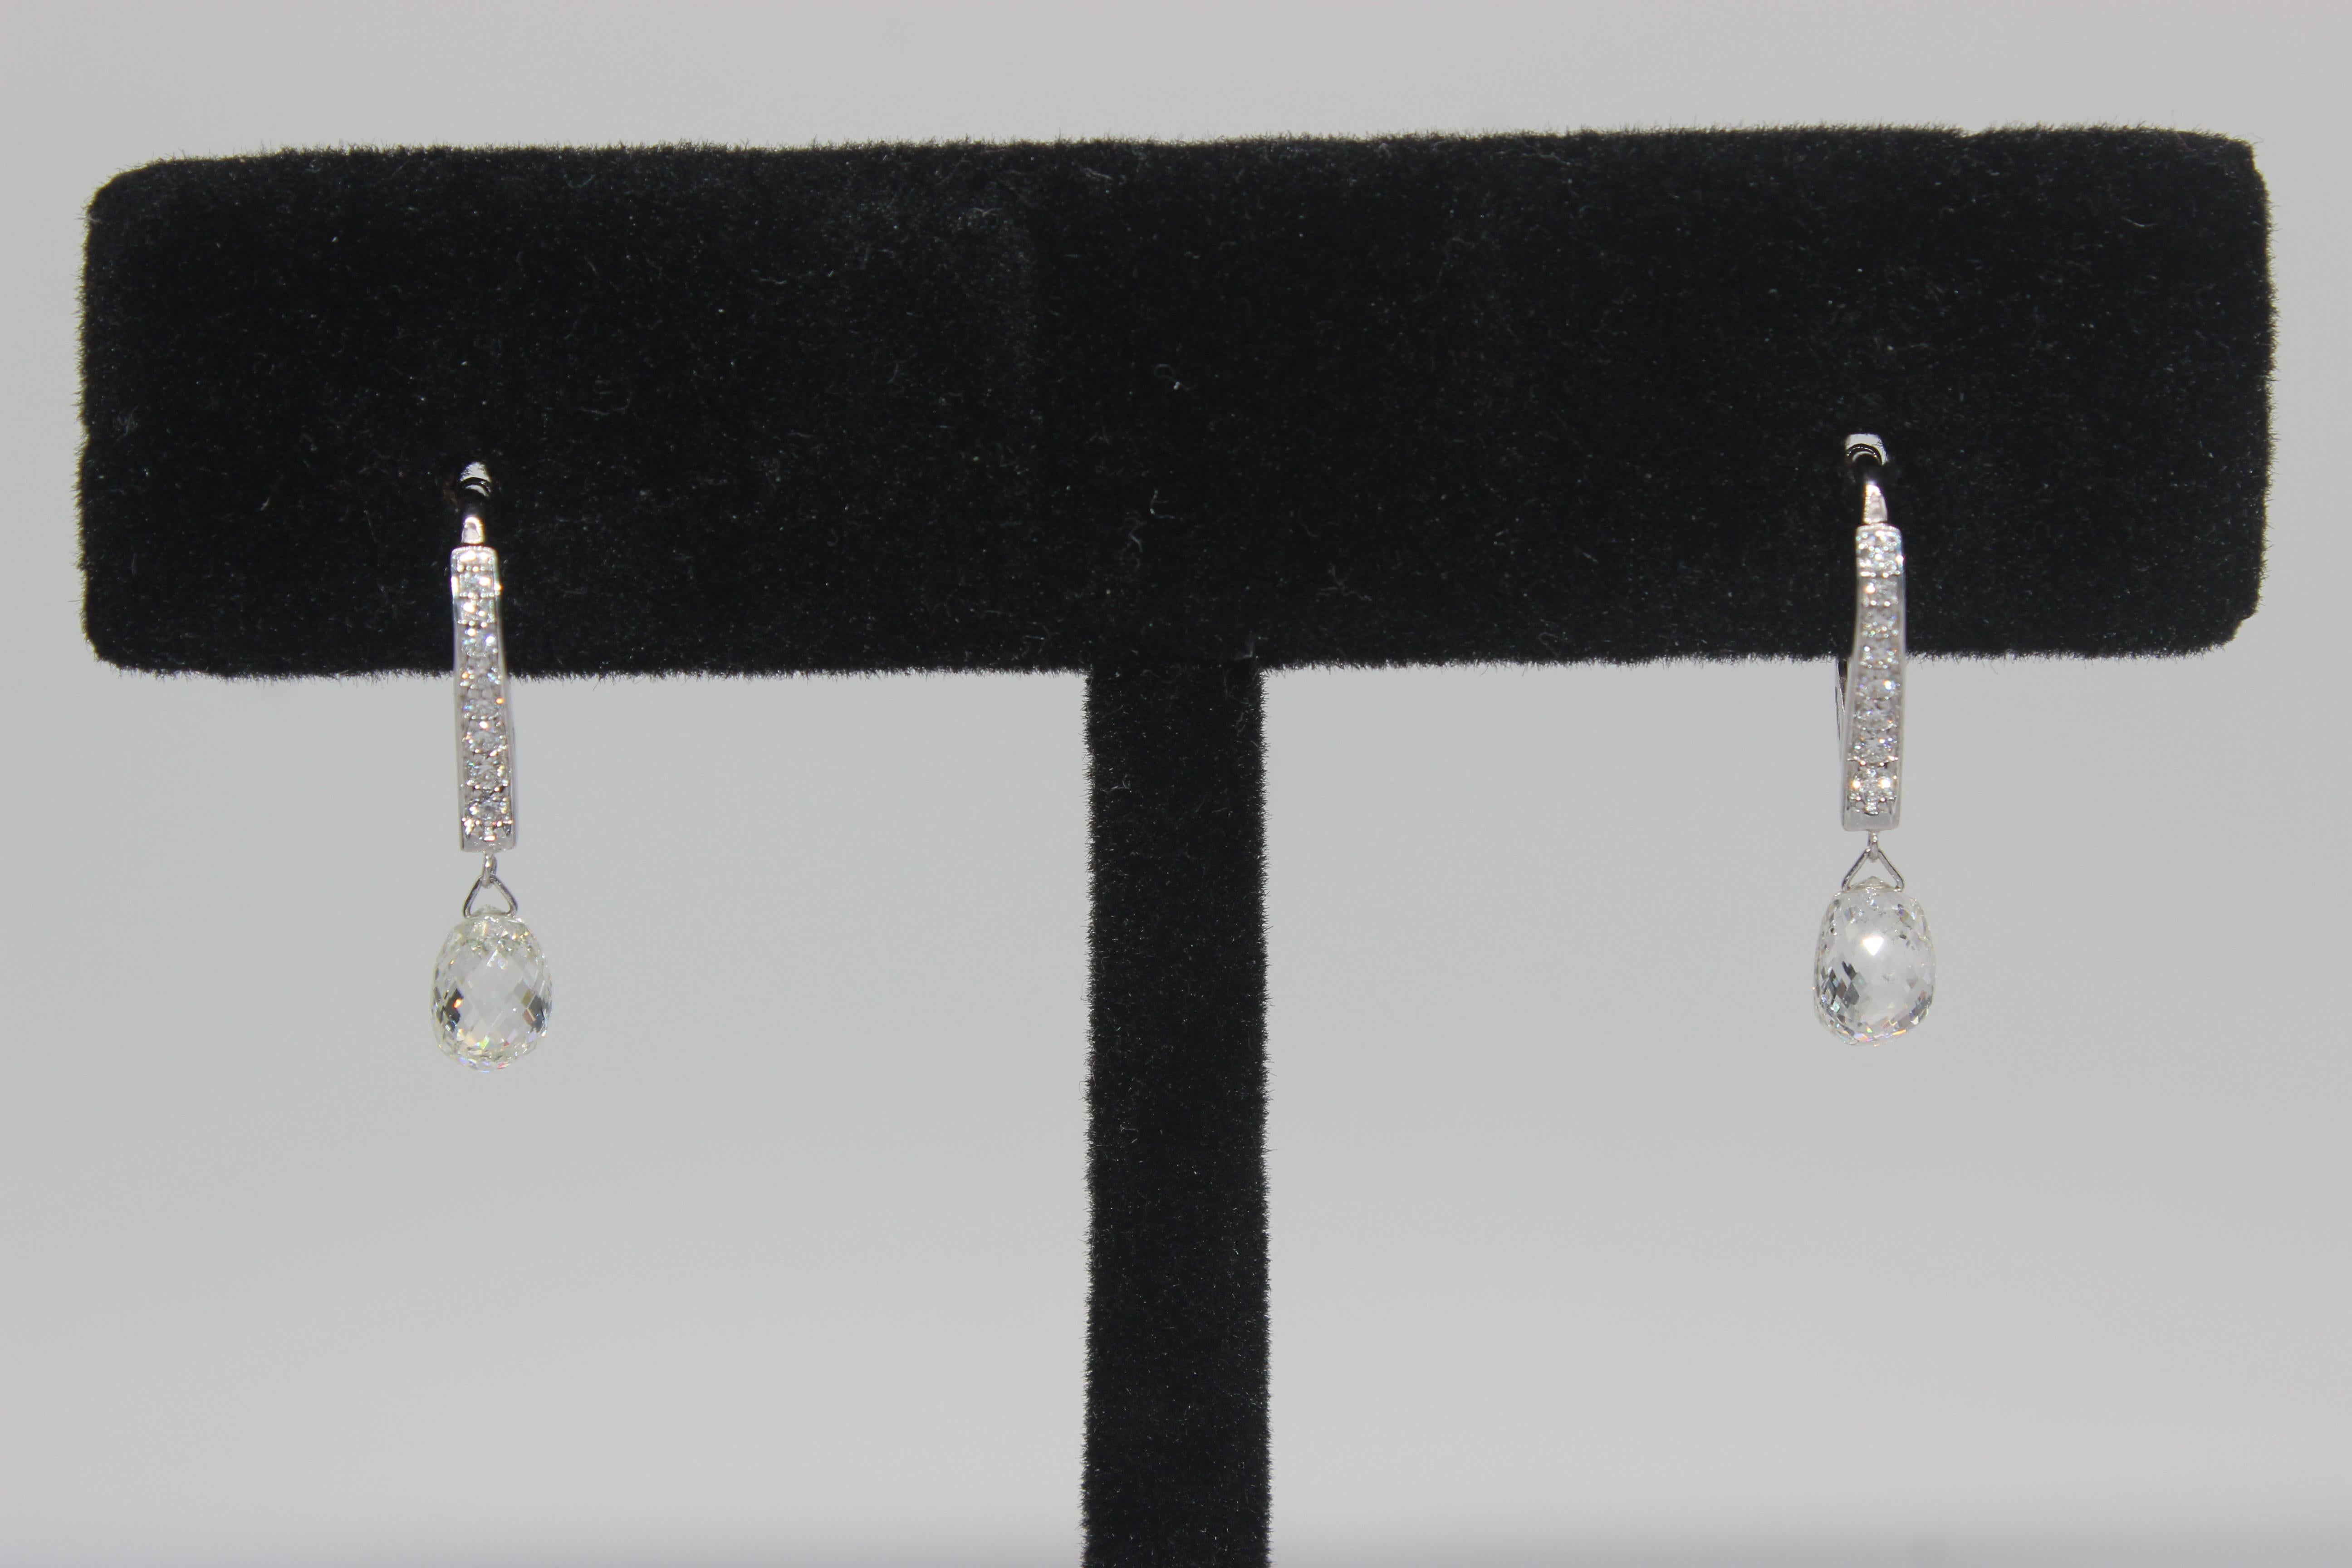 PANIM 2 Carat Diamond Briolette 18K White Gold Dangling Earrings

Sure to set your look apart from the rest, these exquisite drop earrings sparkle with Briolette-cut diamonds. With ease and elegance, these classic Briolette drop earrings complete